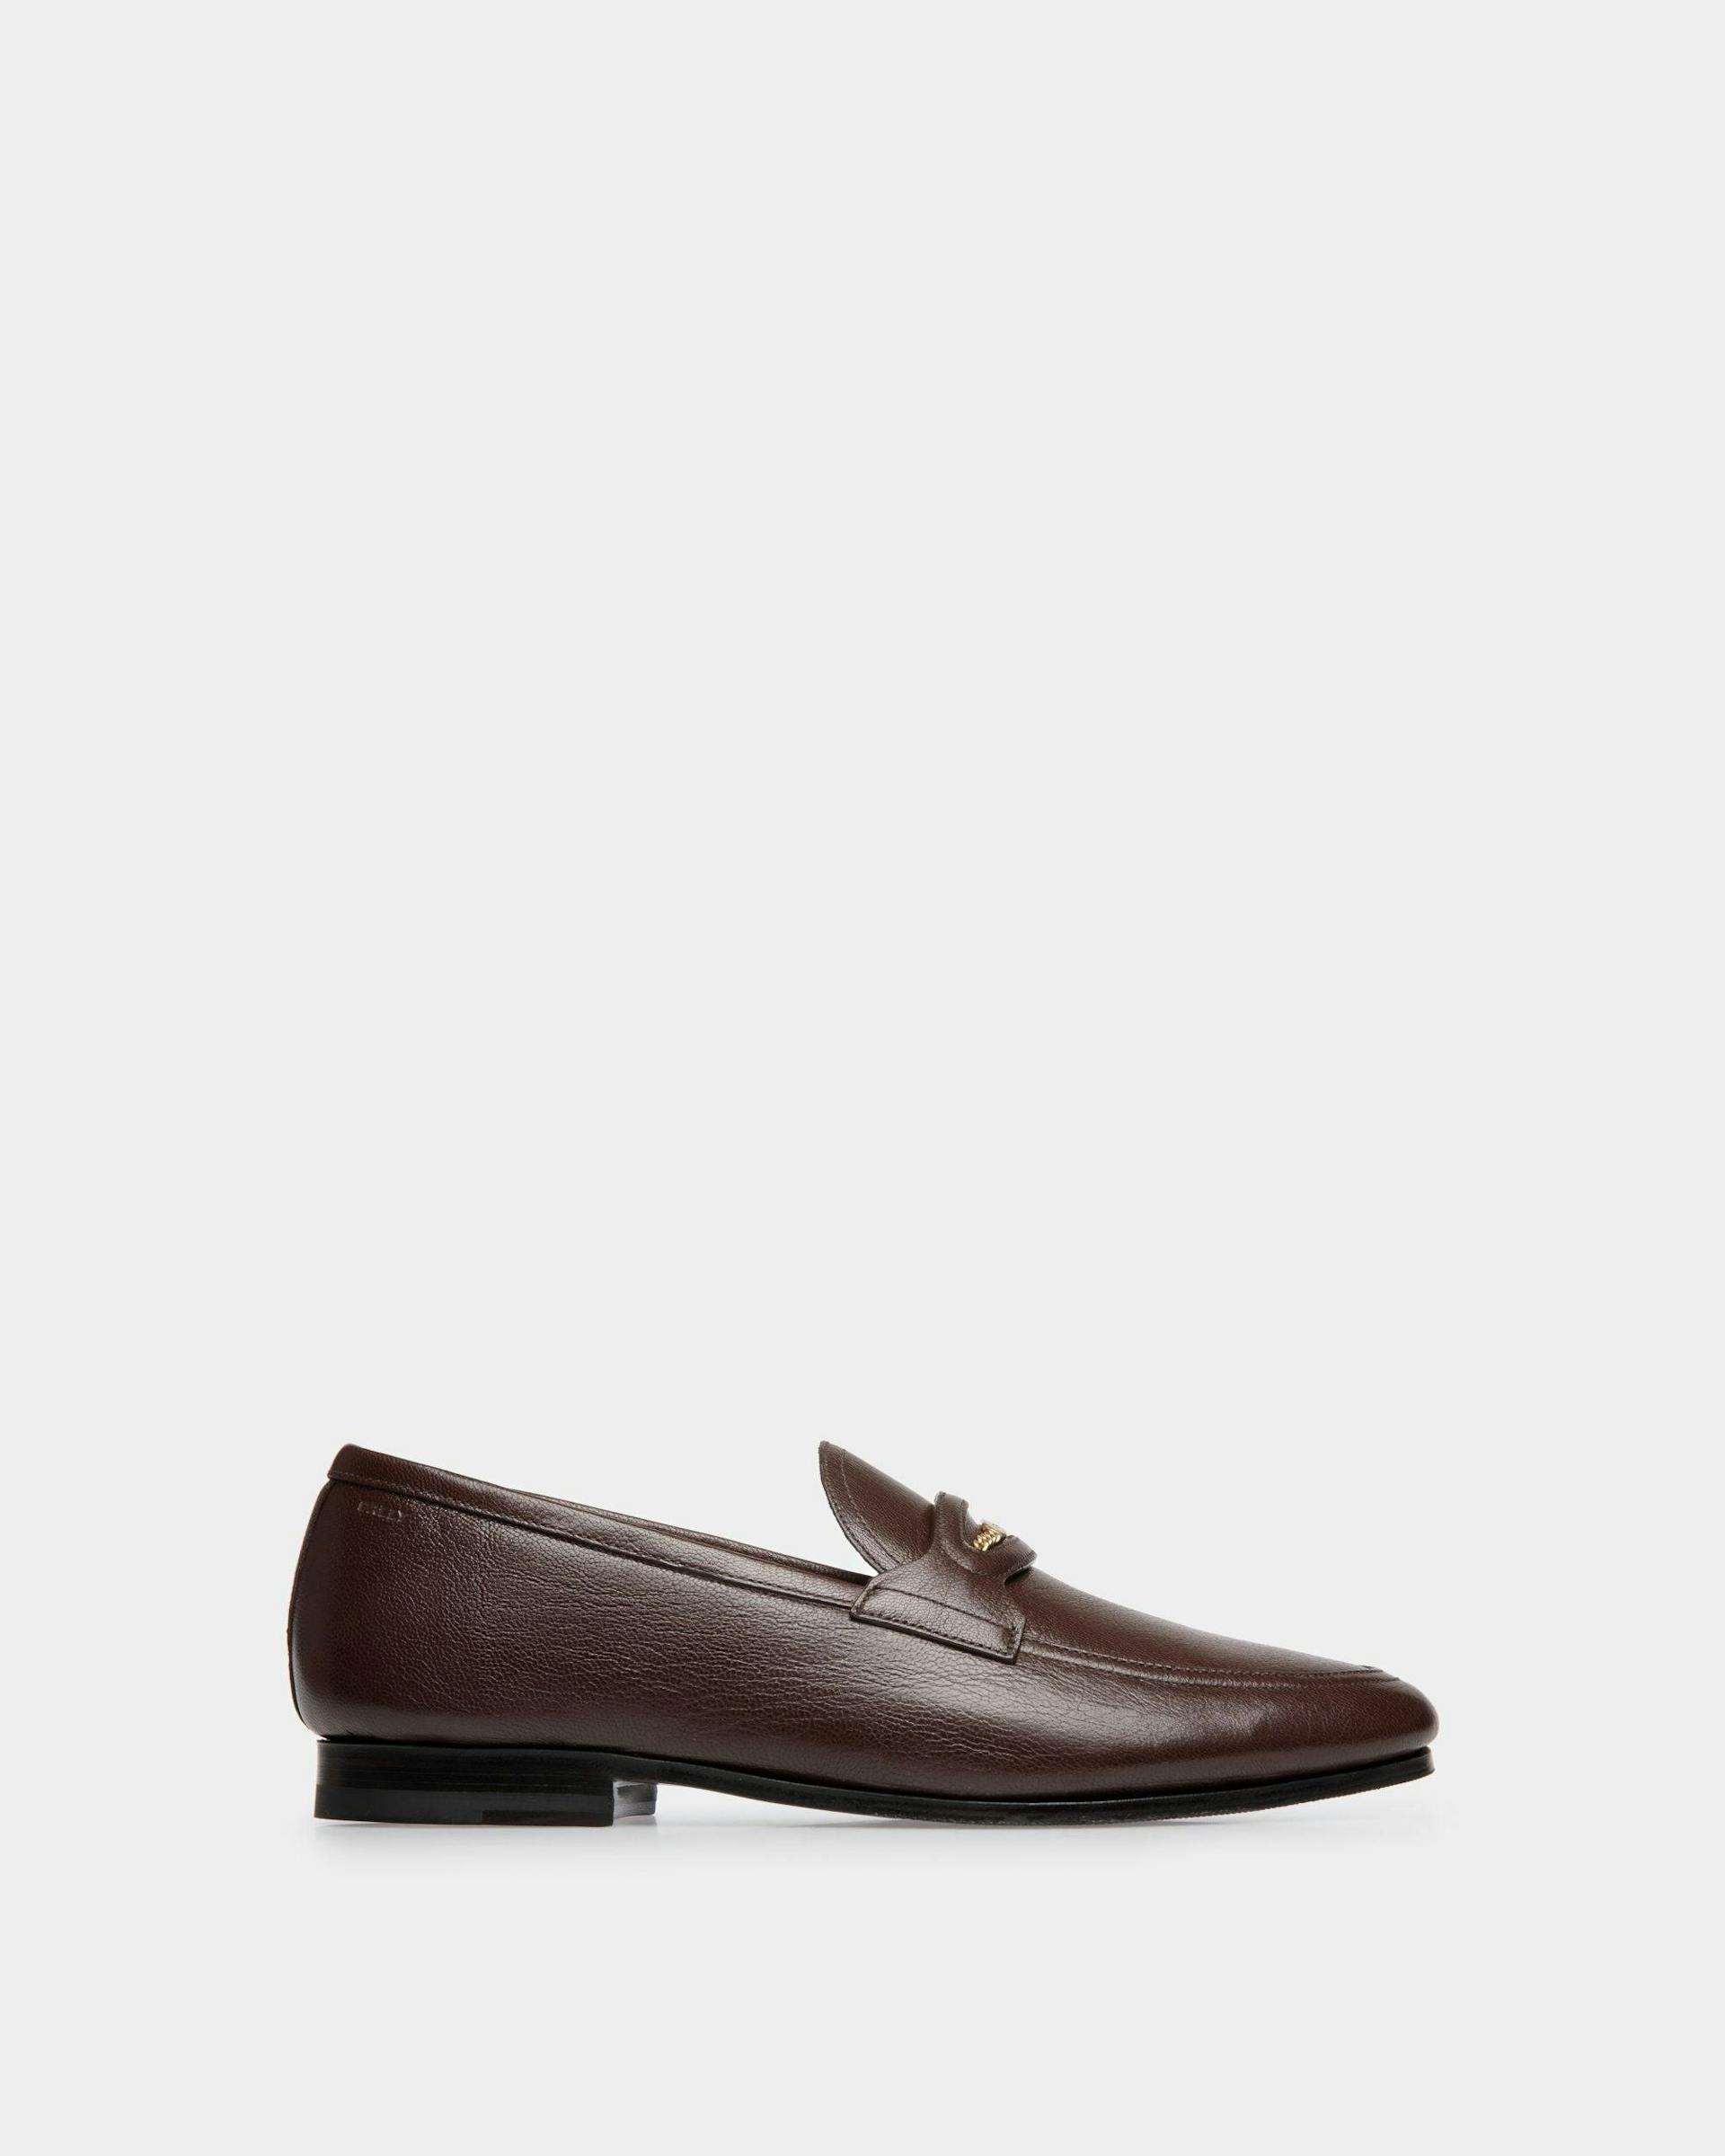 Men's Plume Loafer in Brown Grained Leather | Bally | Still Life Side